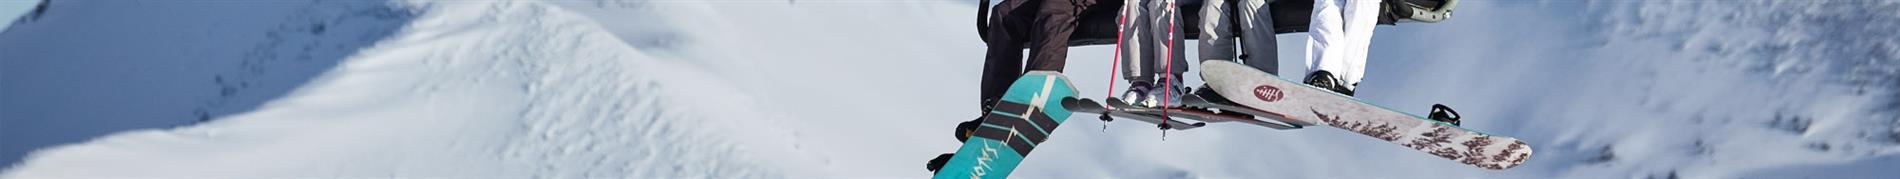 Line Women's skis, snowboards, and accessories for everything snow. 